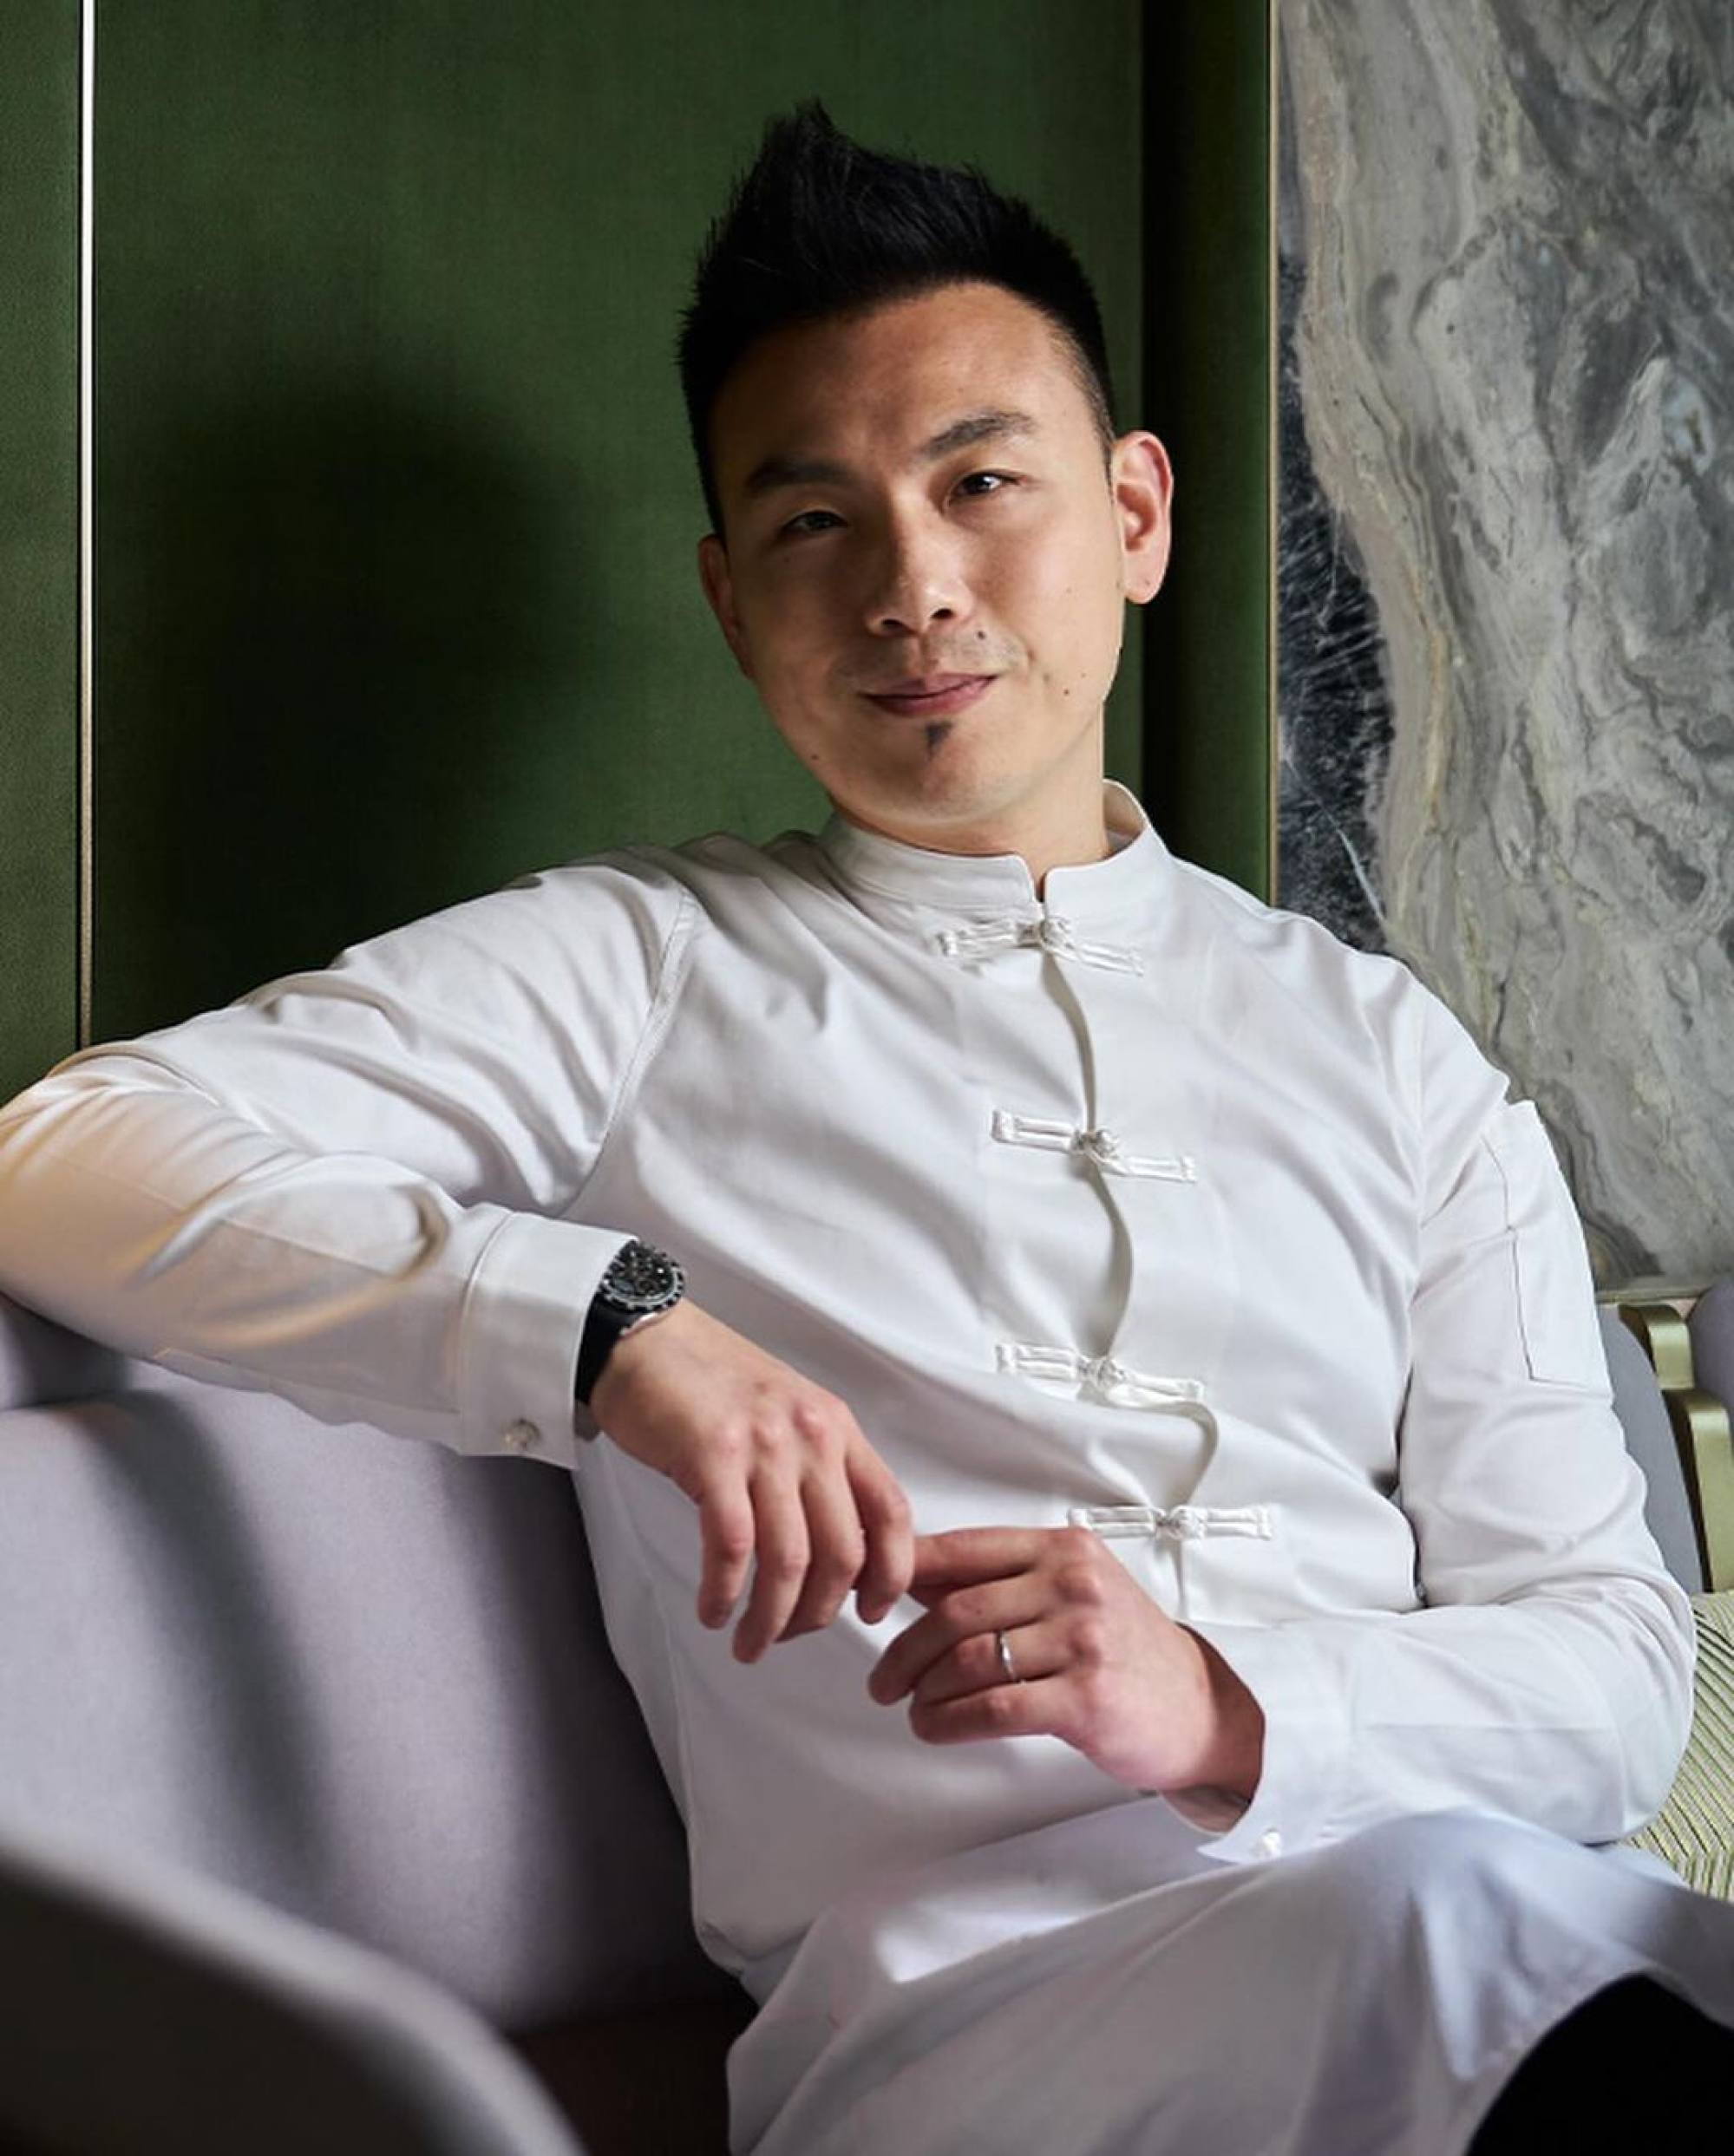 what to expect from capella macau at the galaxy macau, set to open in mid-2025 – from interiors by paris-based firm moinard betaille, to a restaurant by michelin-starred chef vicky cheng